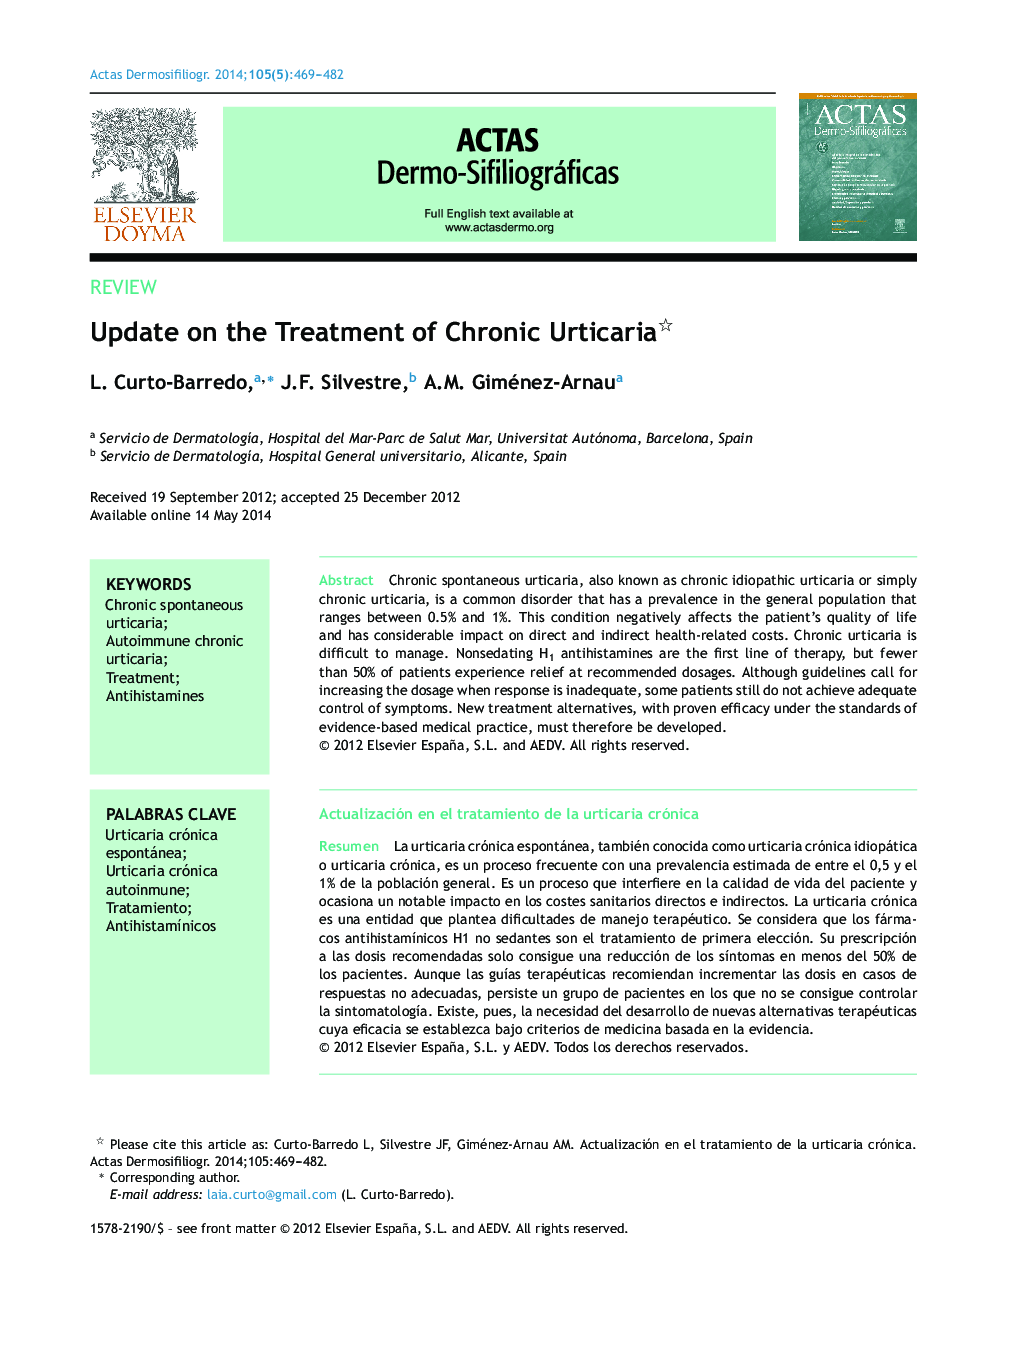 Update on the Treatment of Chronic Urticaria 